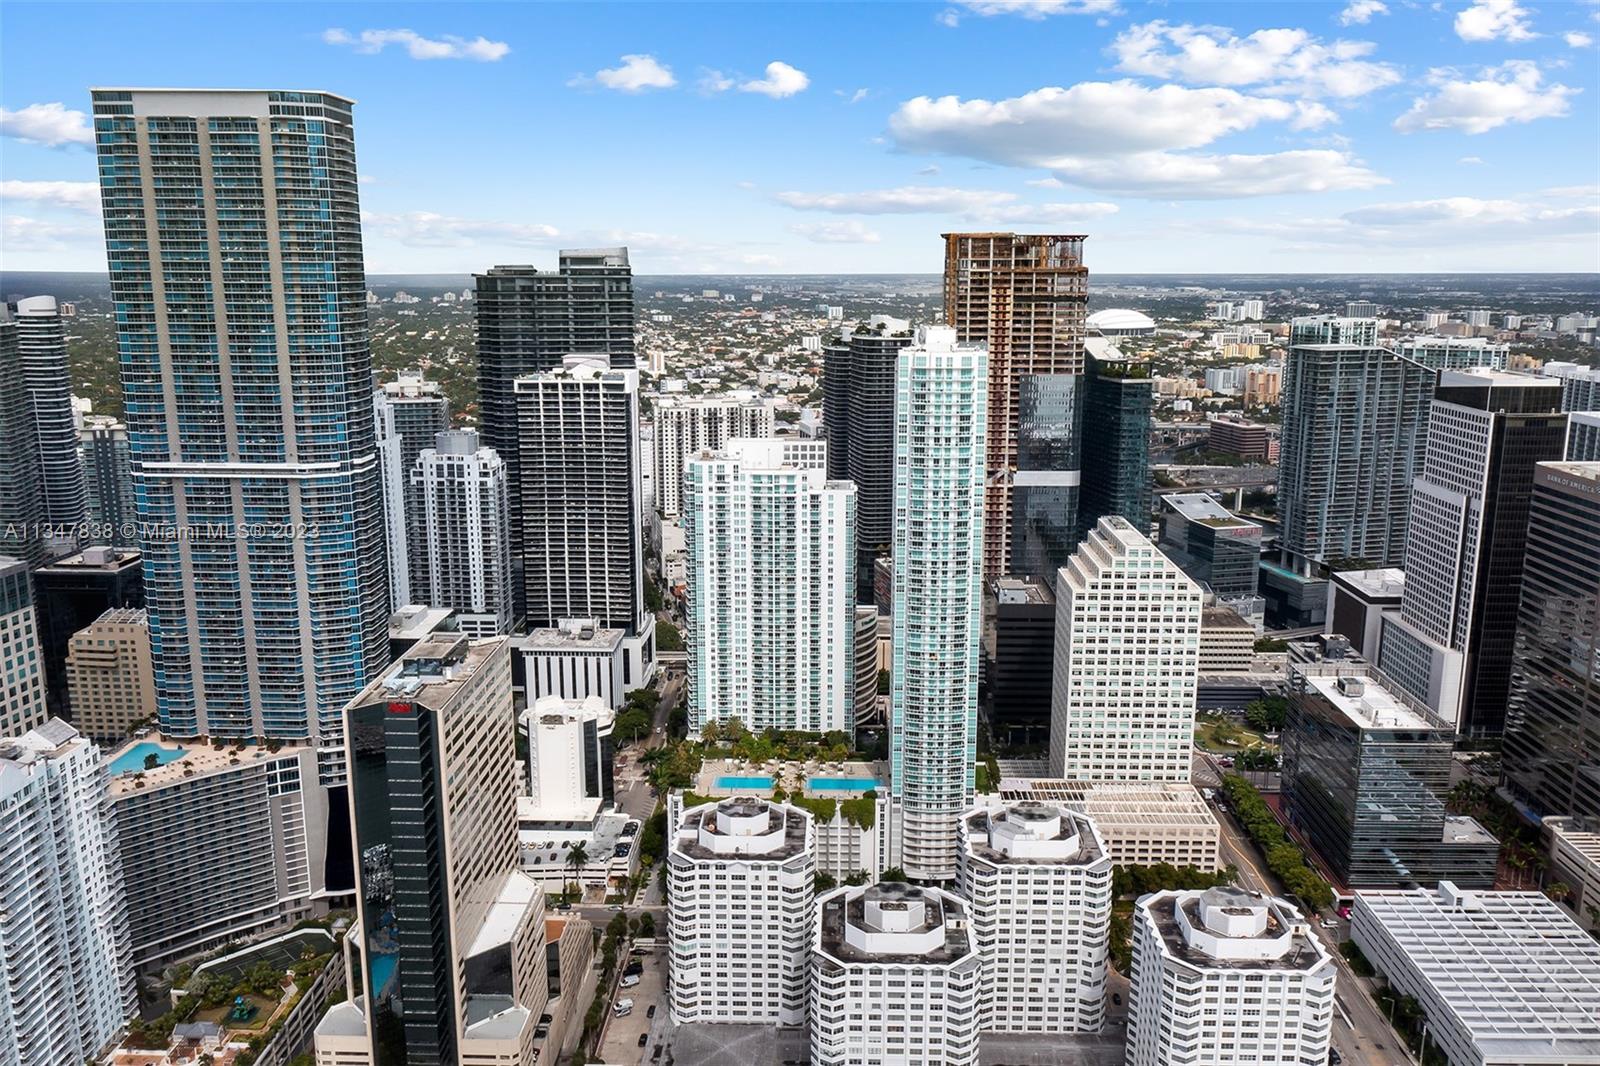 The Plaza on Brickell South image #41